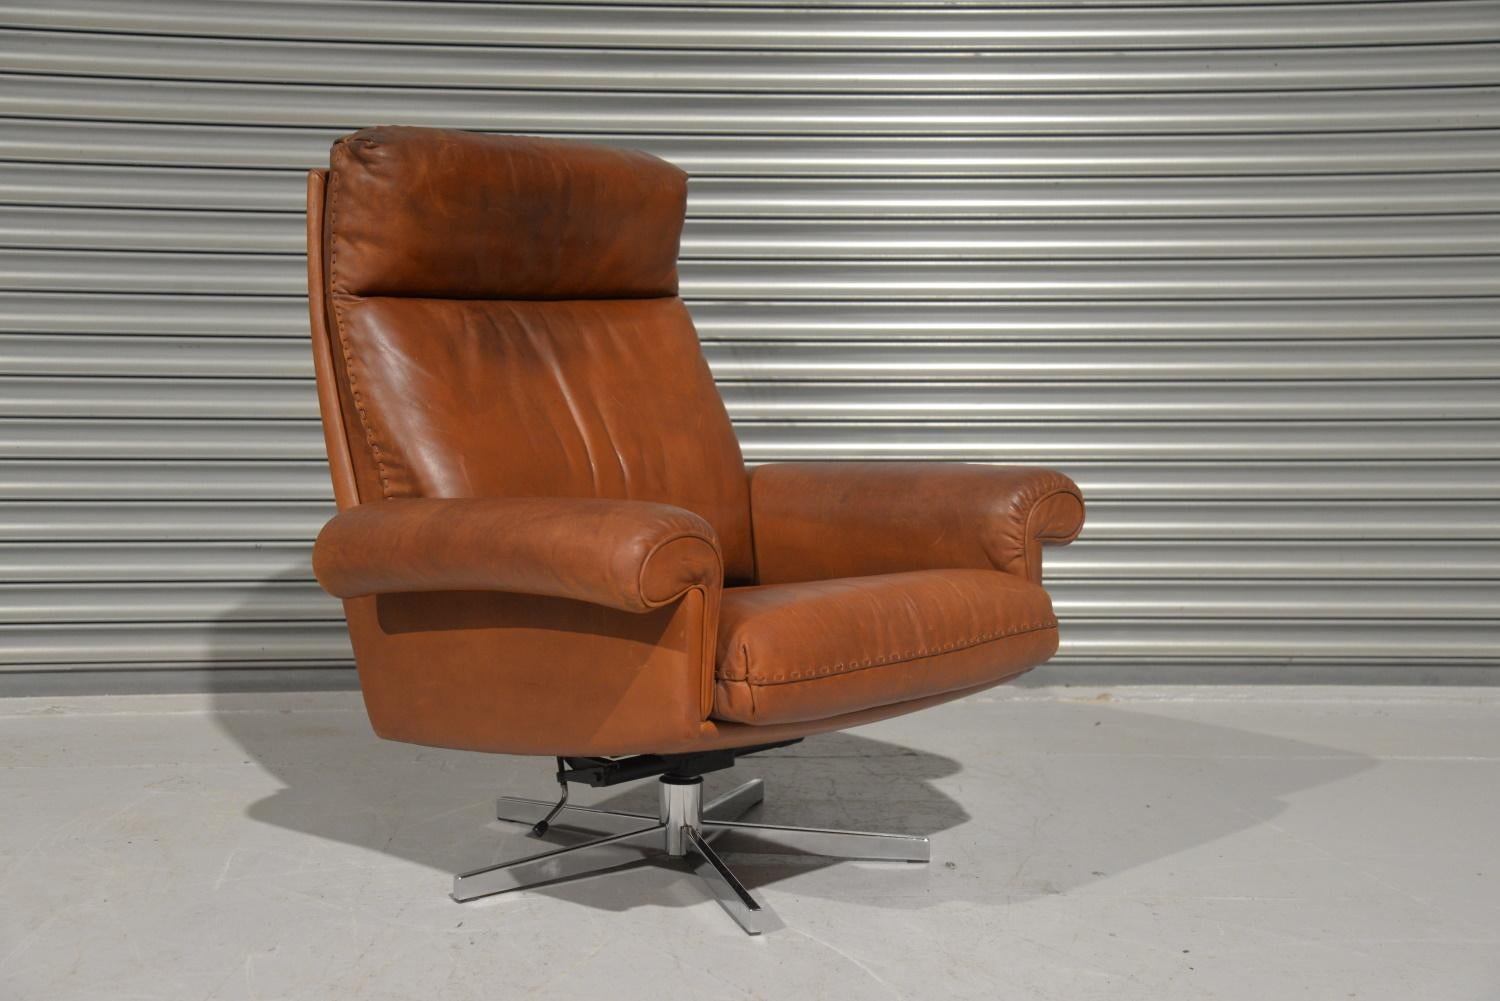 Vintage De Sede DS 31 High Back Leather Swivel Armchair with Ottoman, 1970s For Sale 5